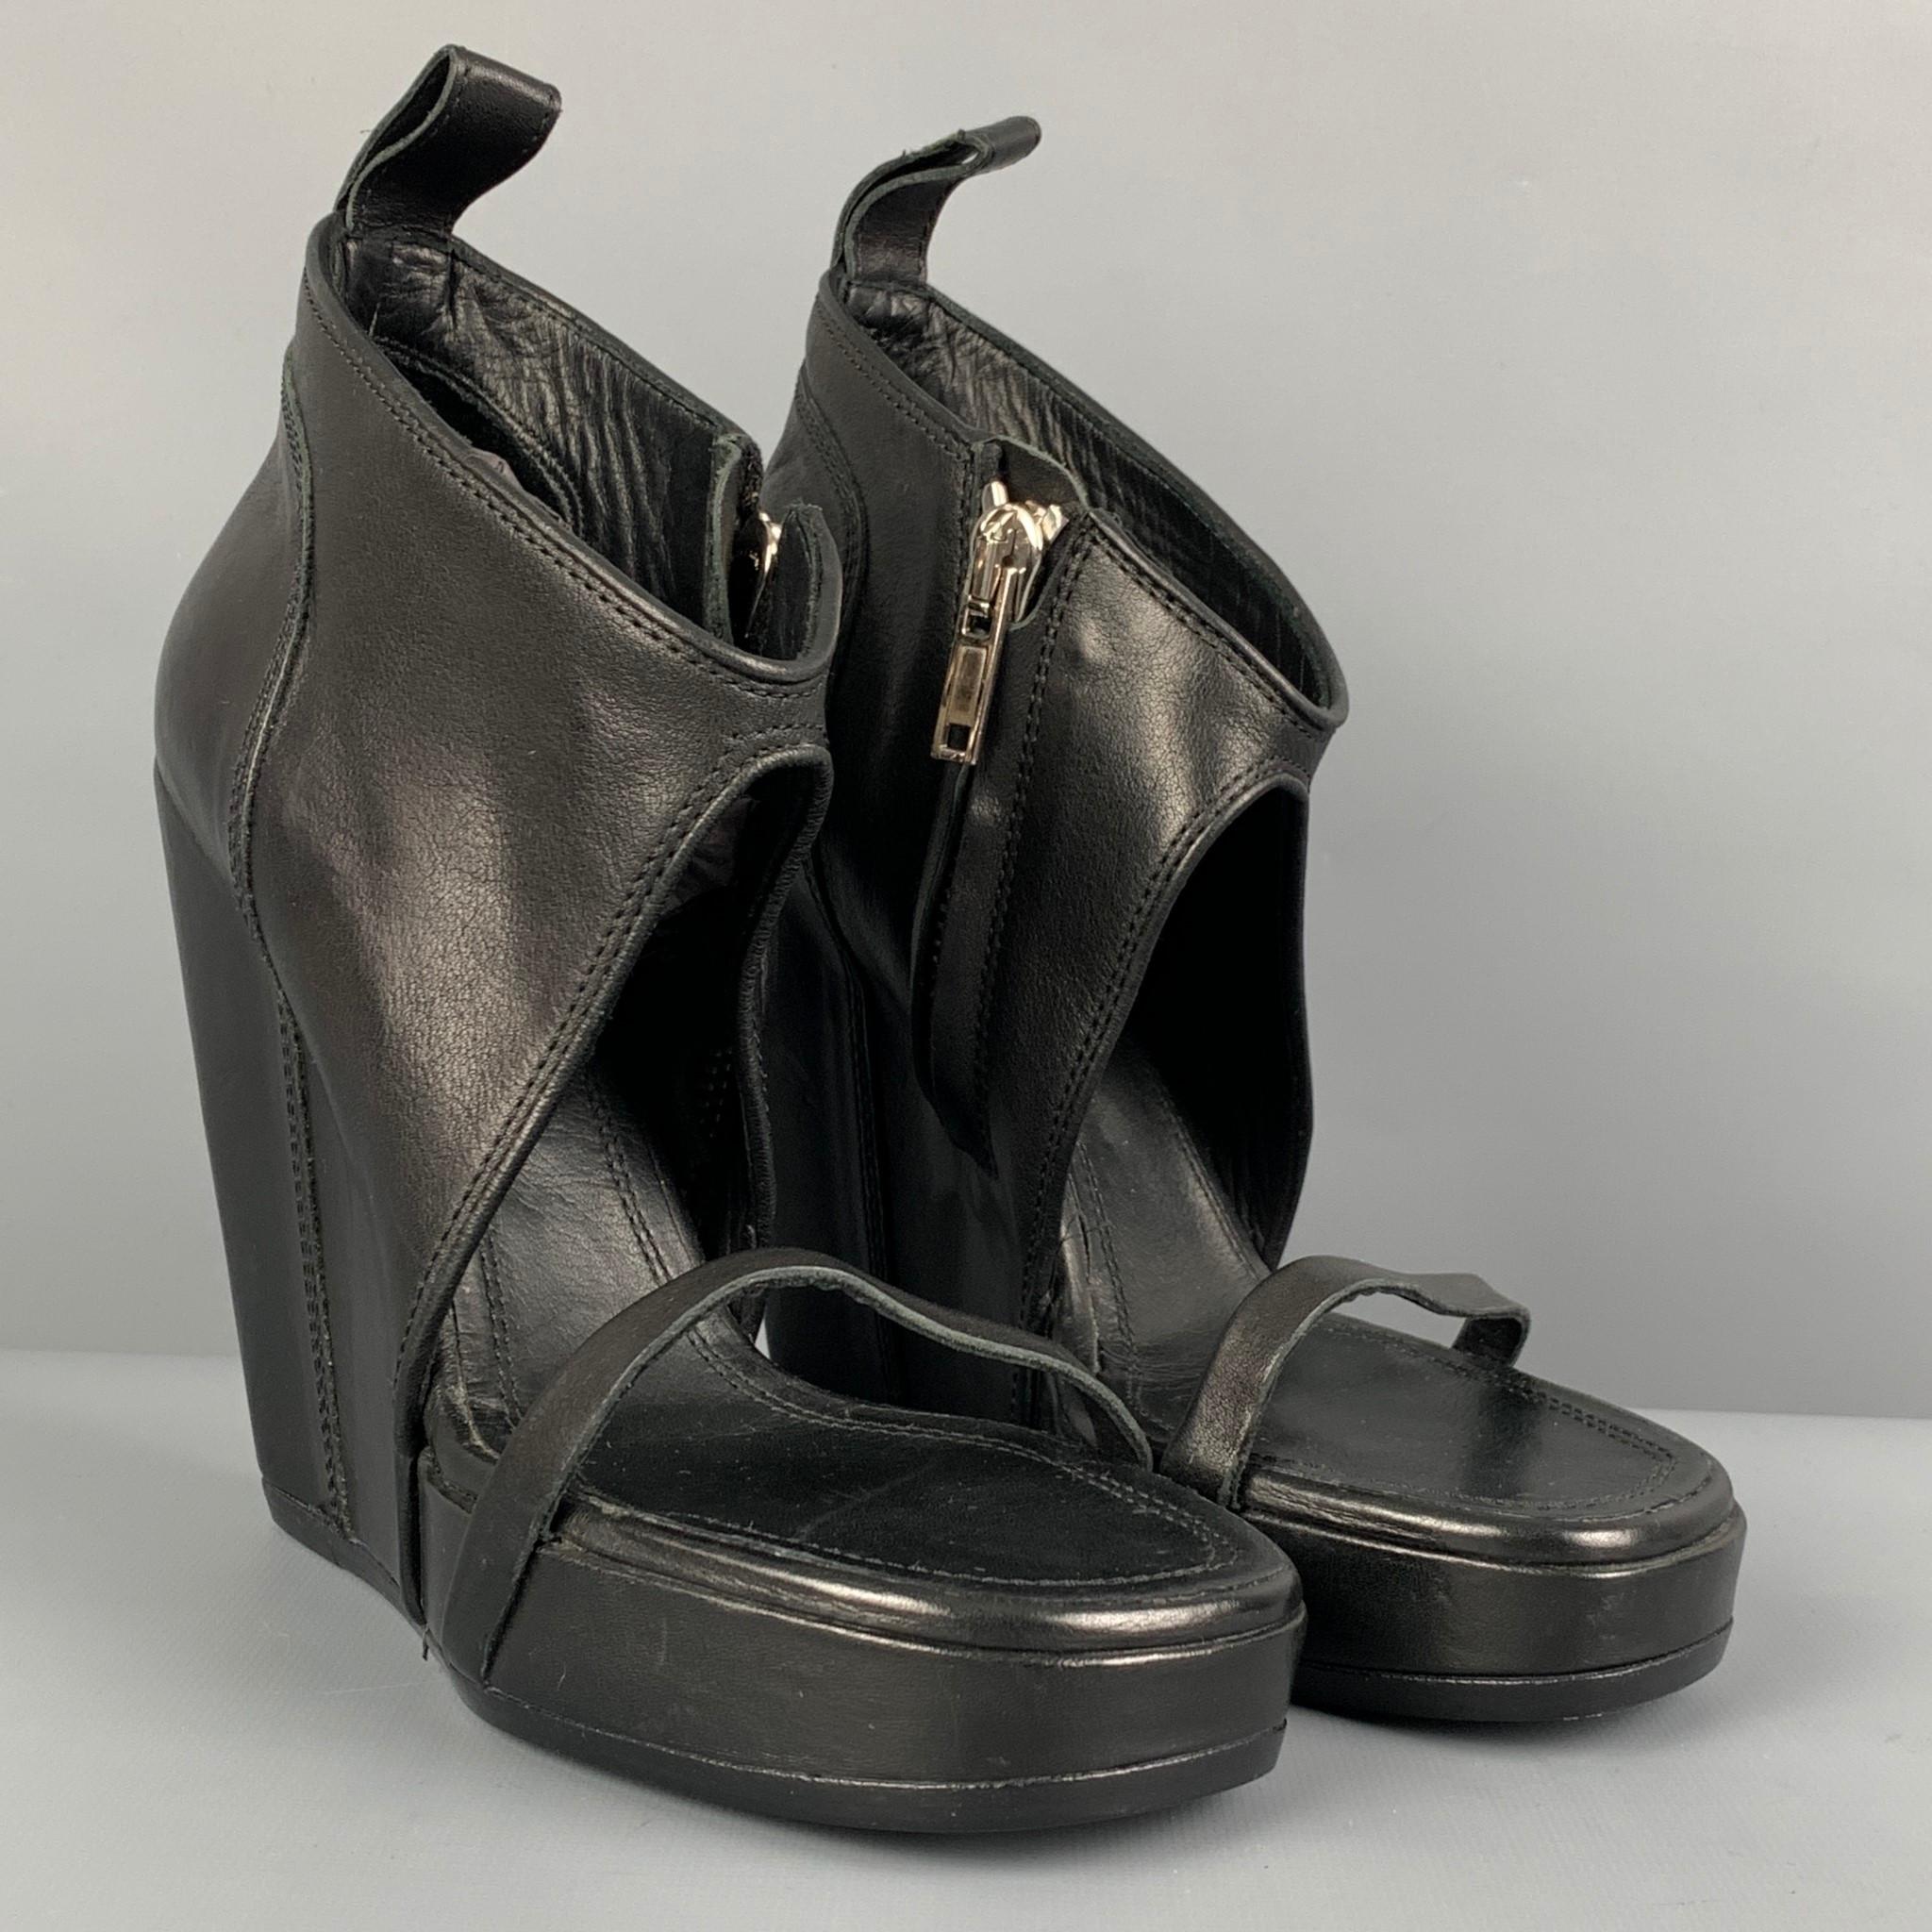 RICK OWENS boots comes in a black leather featuring a open toe, side zipper closure, and a wedge heel. Made in Italy. 

Very Good Pre-Owned Condition.
Marked: 40
Original Retail Price: $1,700.00

Measurements:

Heel: 5 in.
Platform: 1 in. 